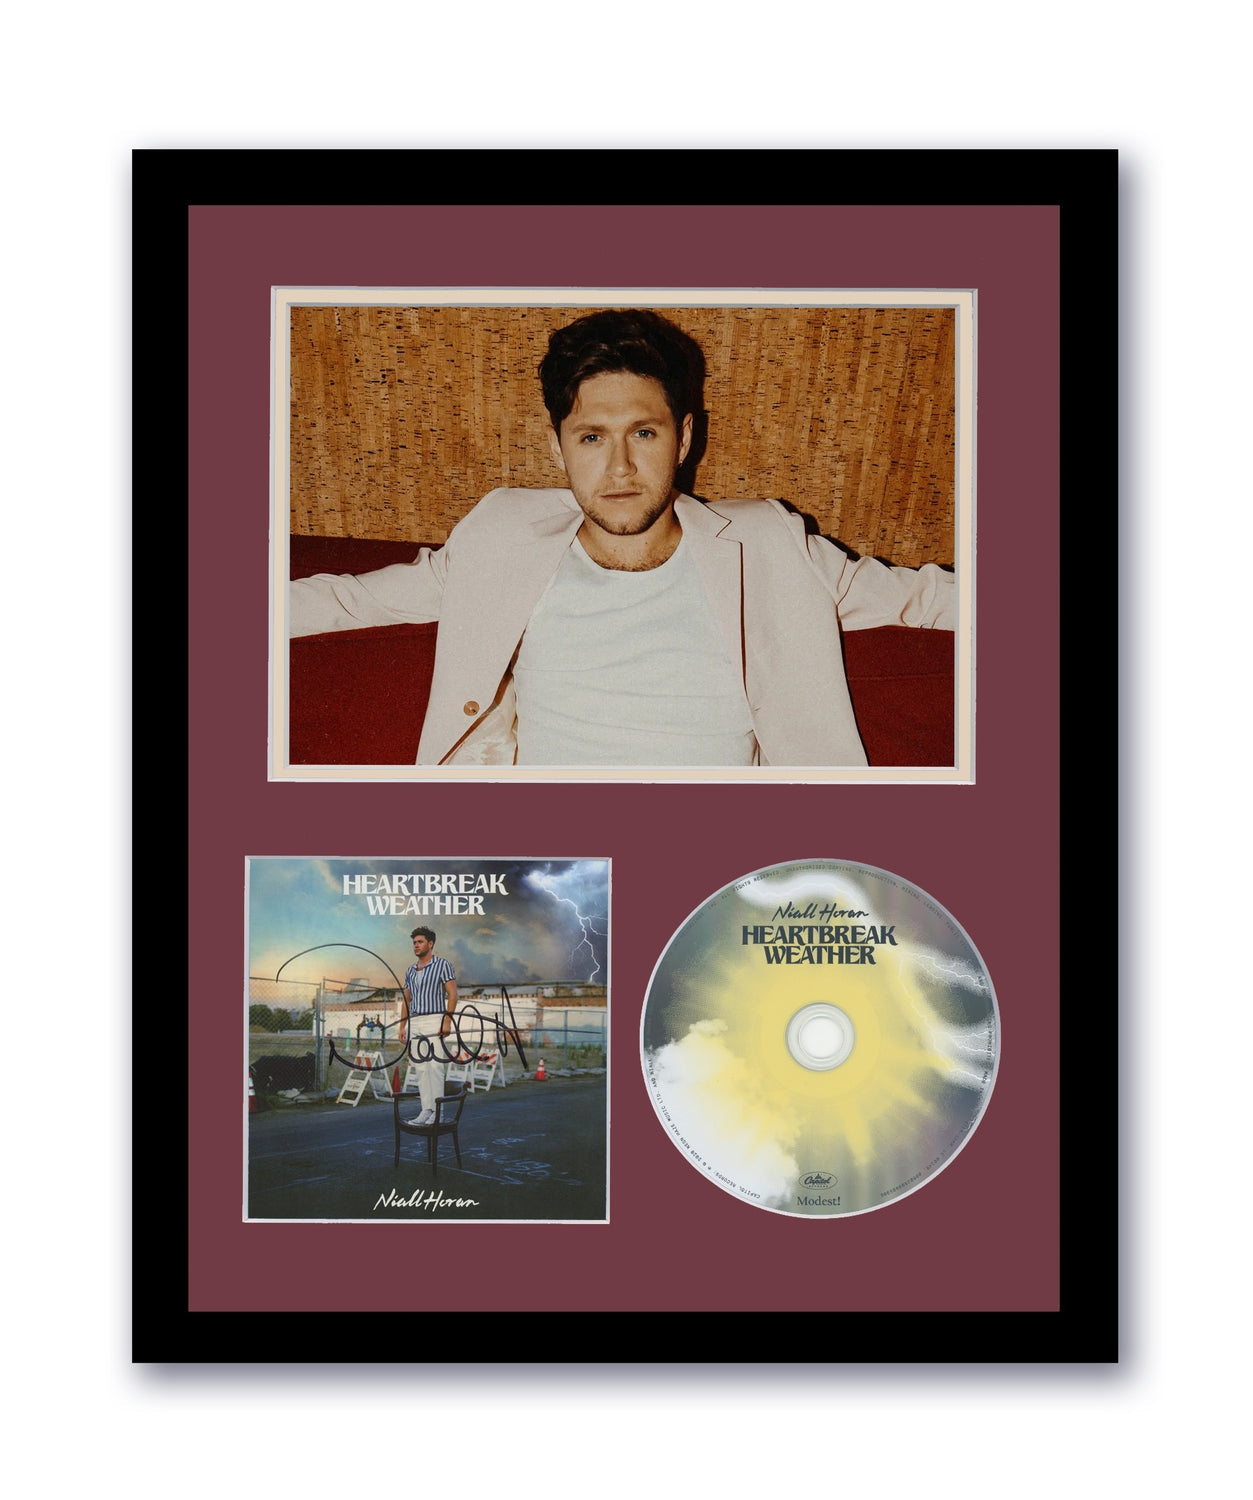 Niall Horan Autographed Signed 11x14 Framed CD Photo One Direction 1D ACOA 3